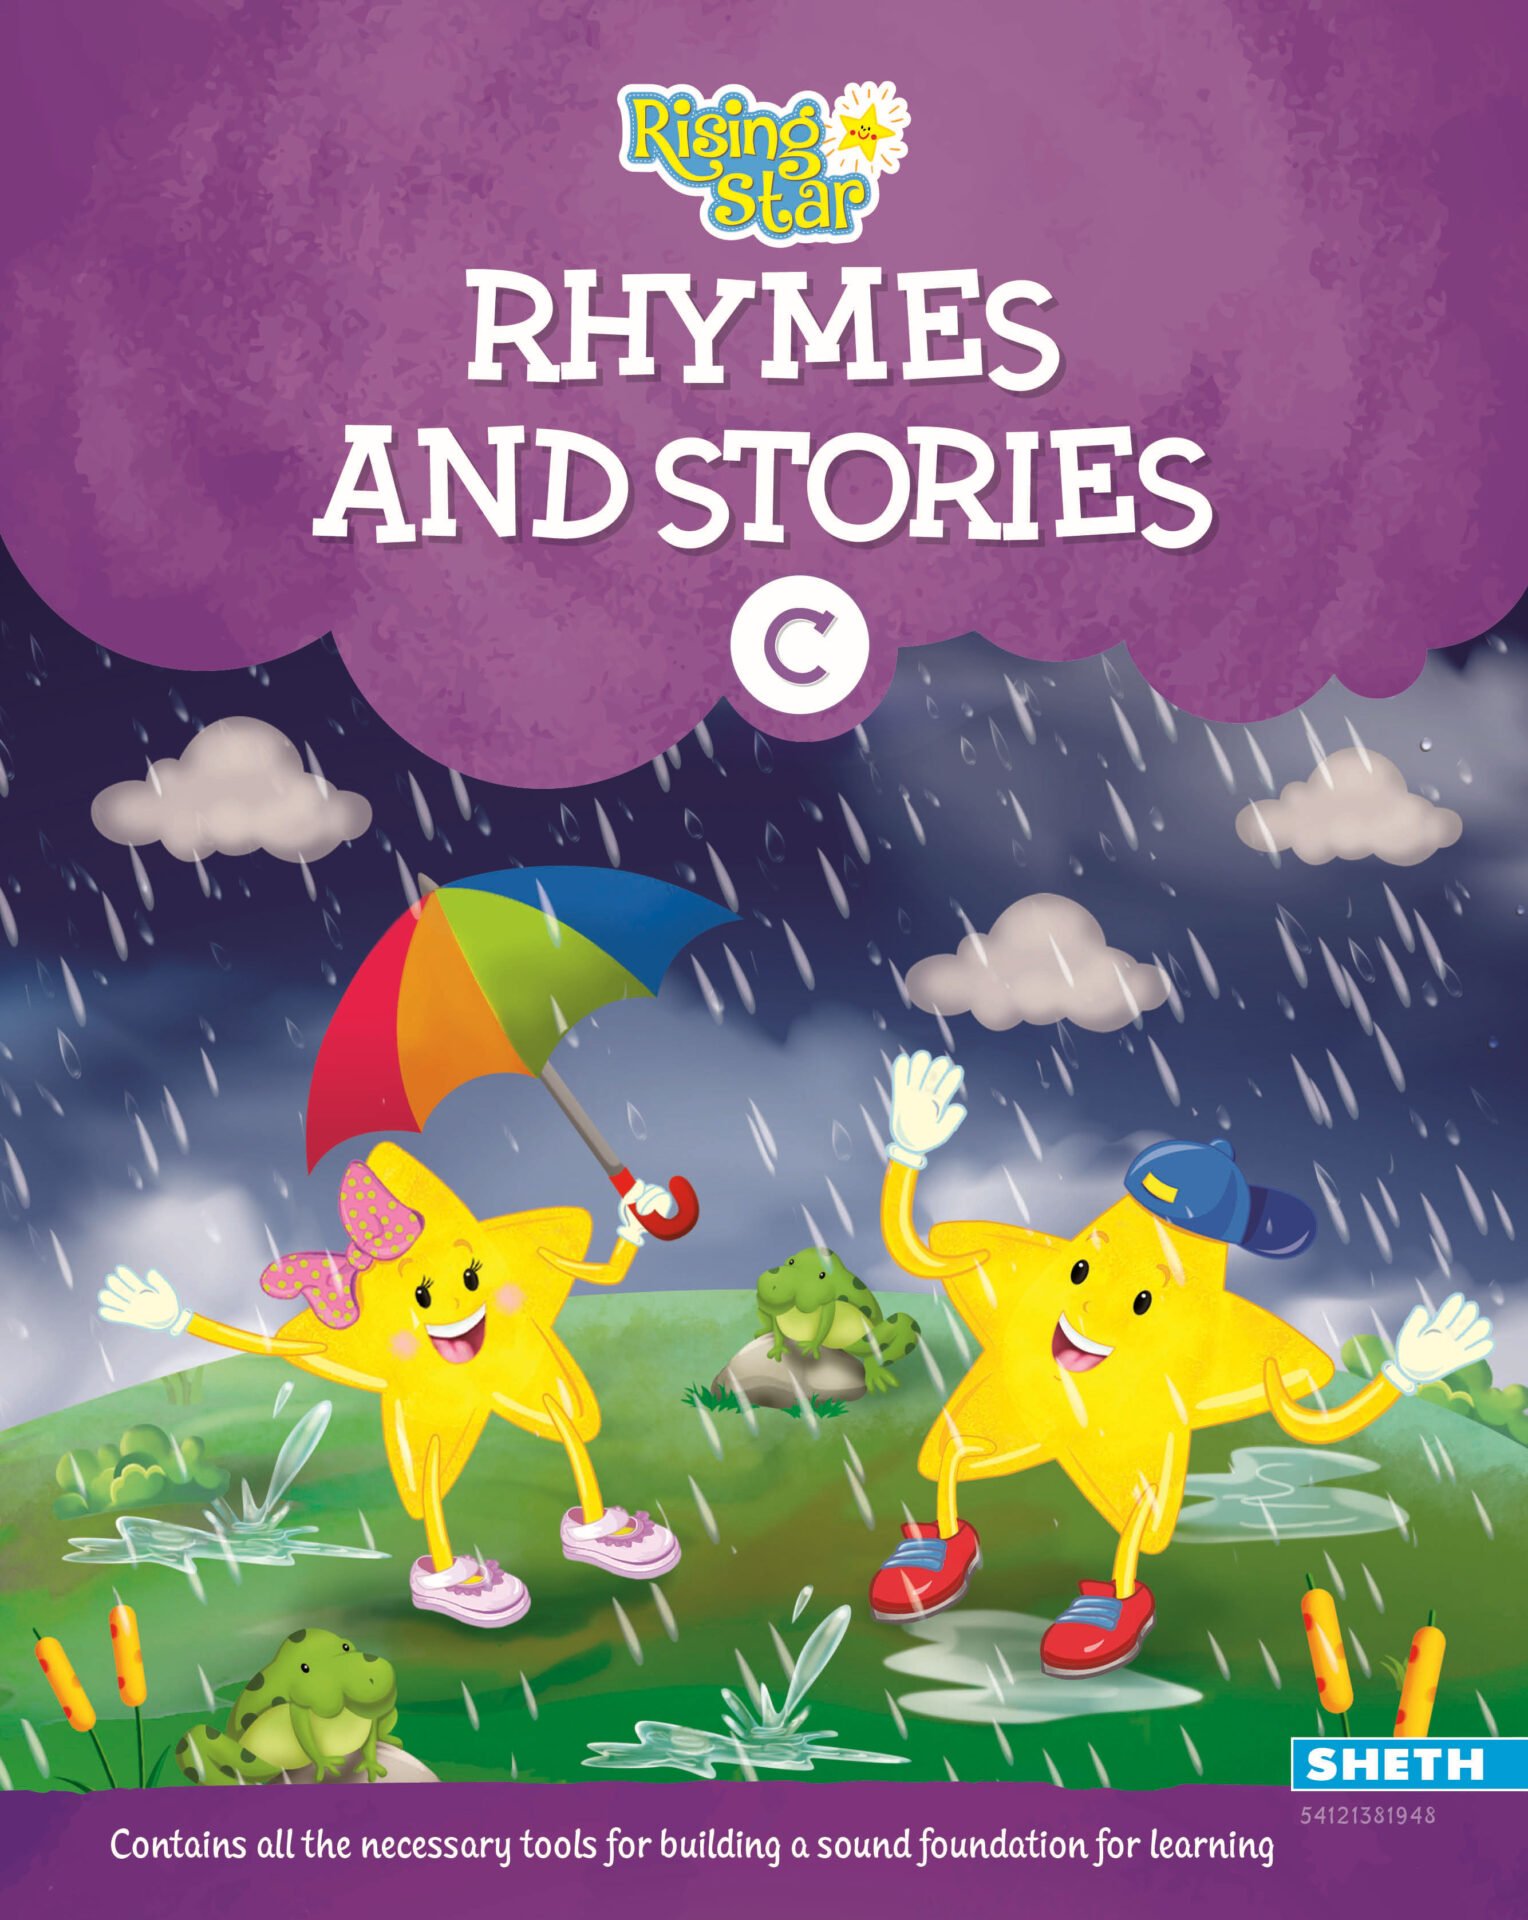 Rising Star Rhymes and Stories C 1 2